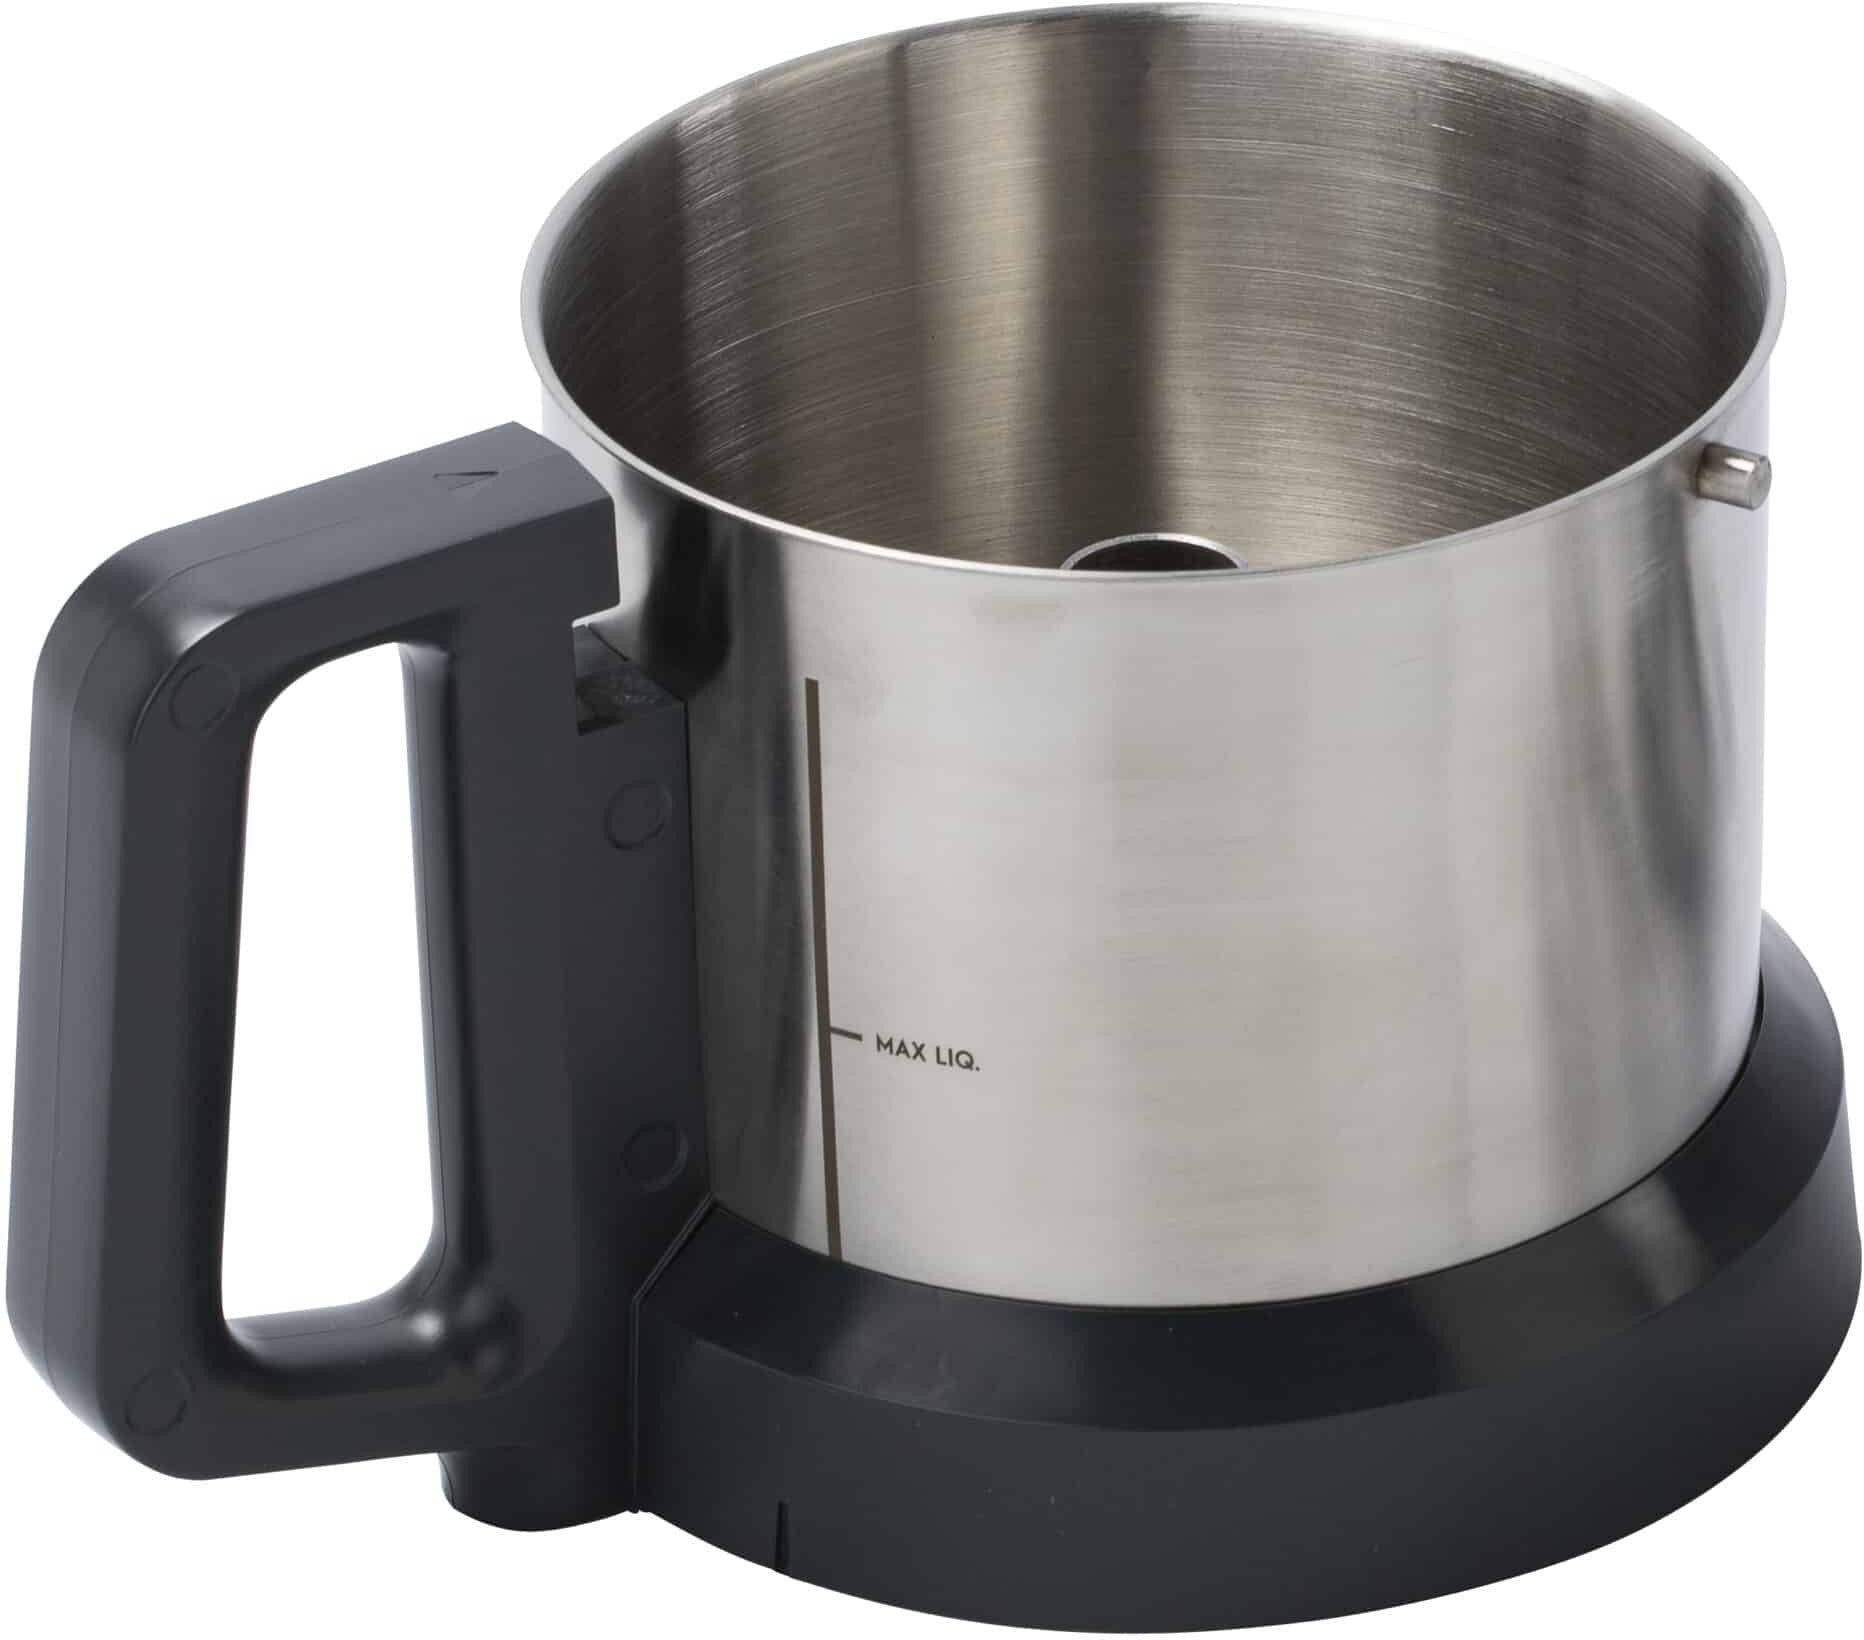 DITO SAMA - Stainless Steel Bowl for 2.6 lt Cutter Mixer - 650228